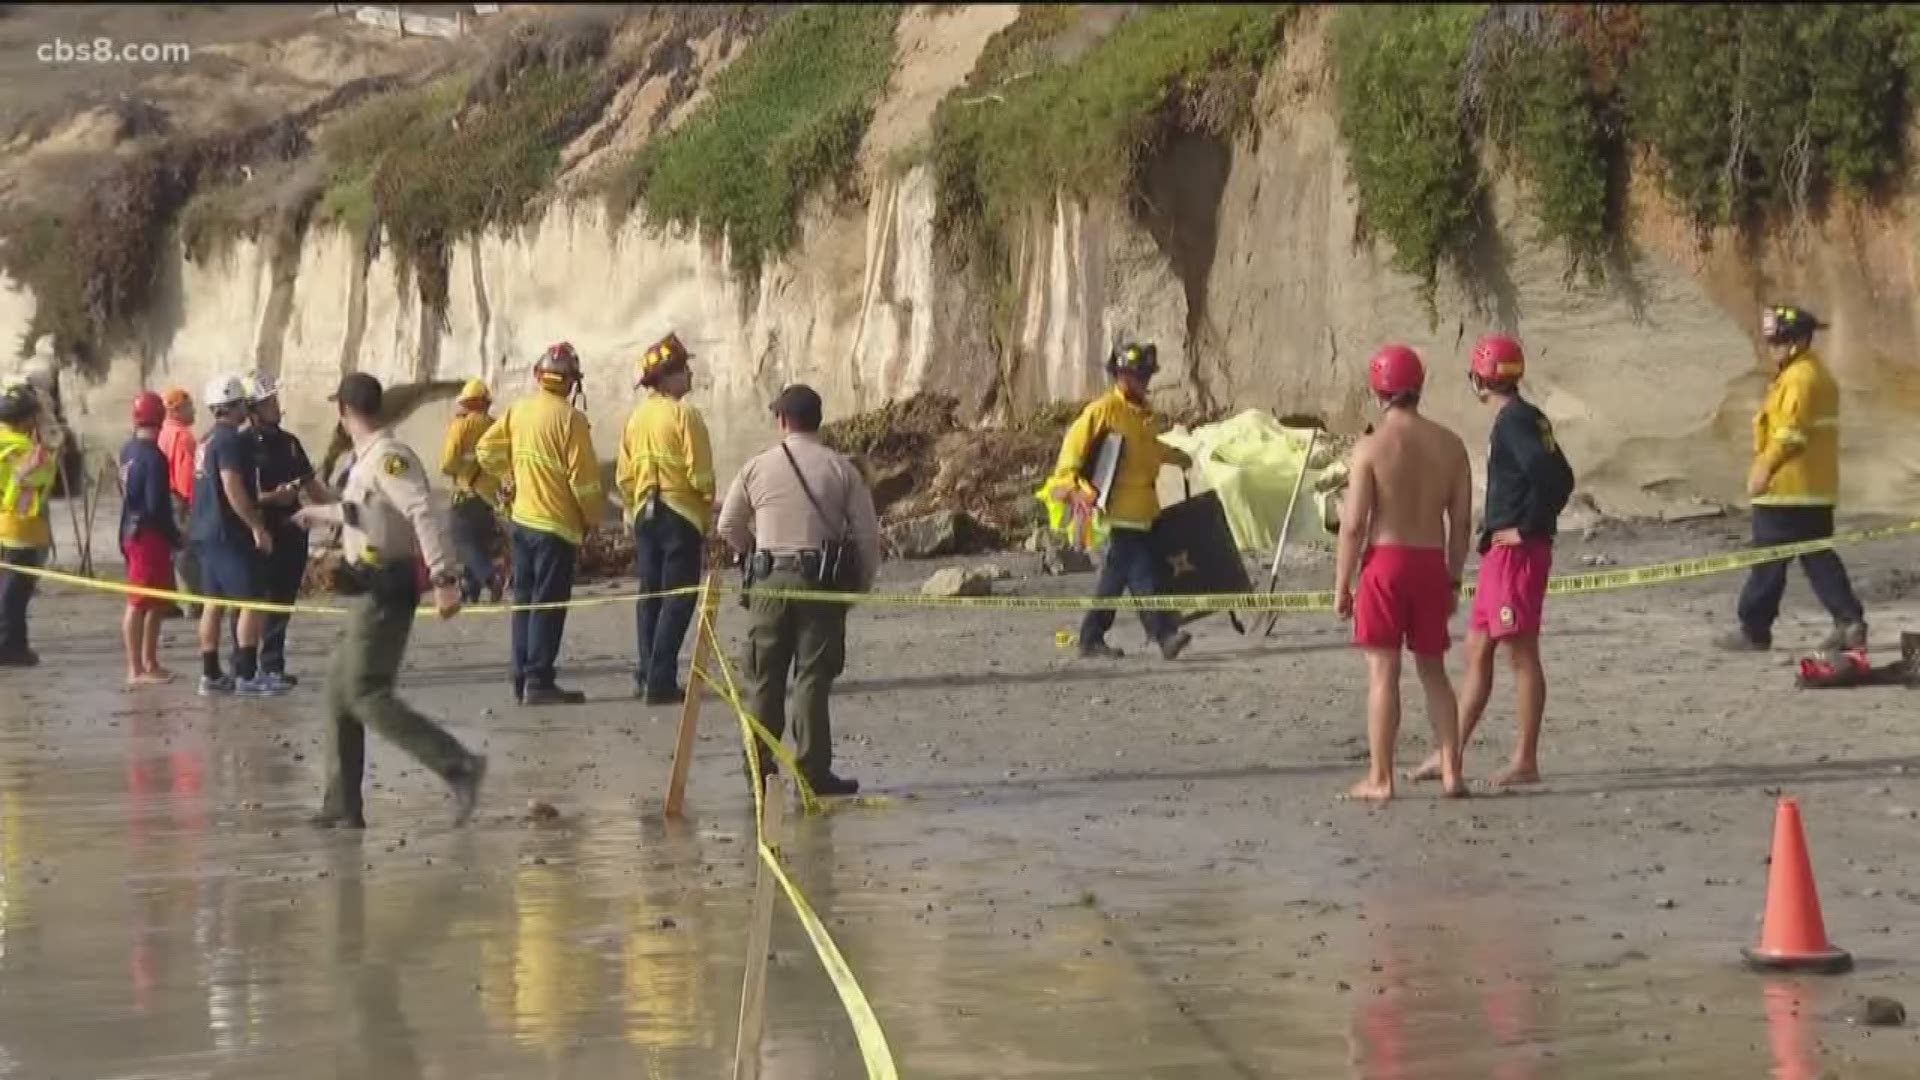 The City of Encinitas on Friday night confirmed three people were killed after a sea bluff collapsed on them on a stretch of ocean shoreline in Leucadia.